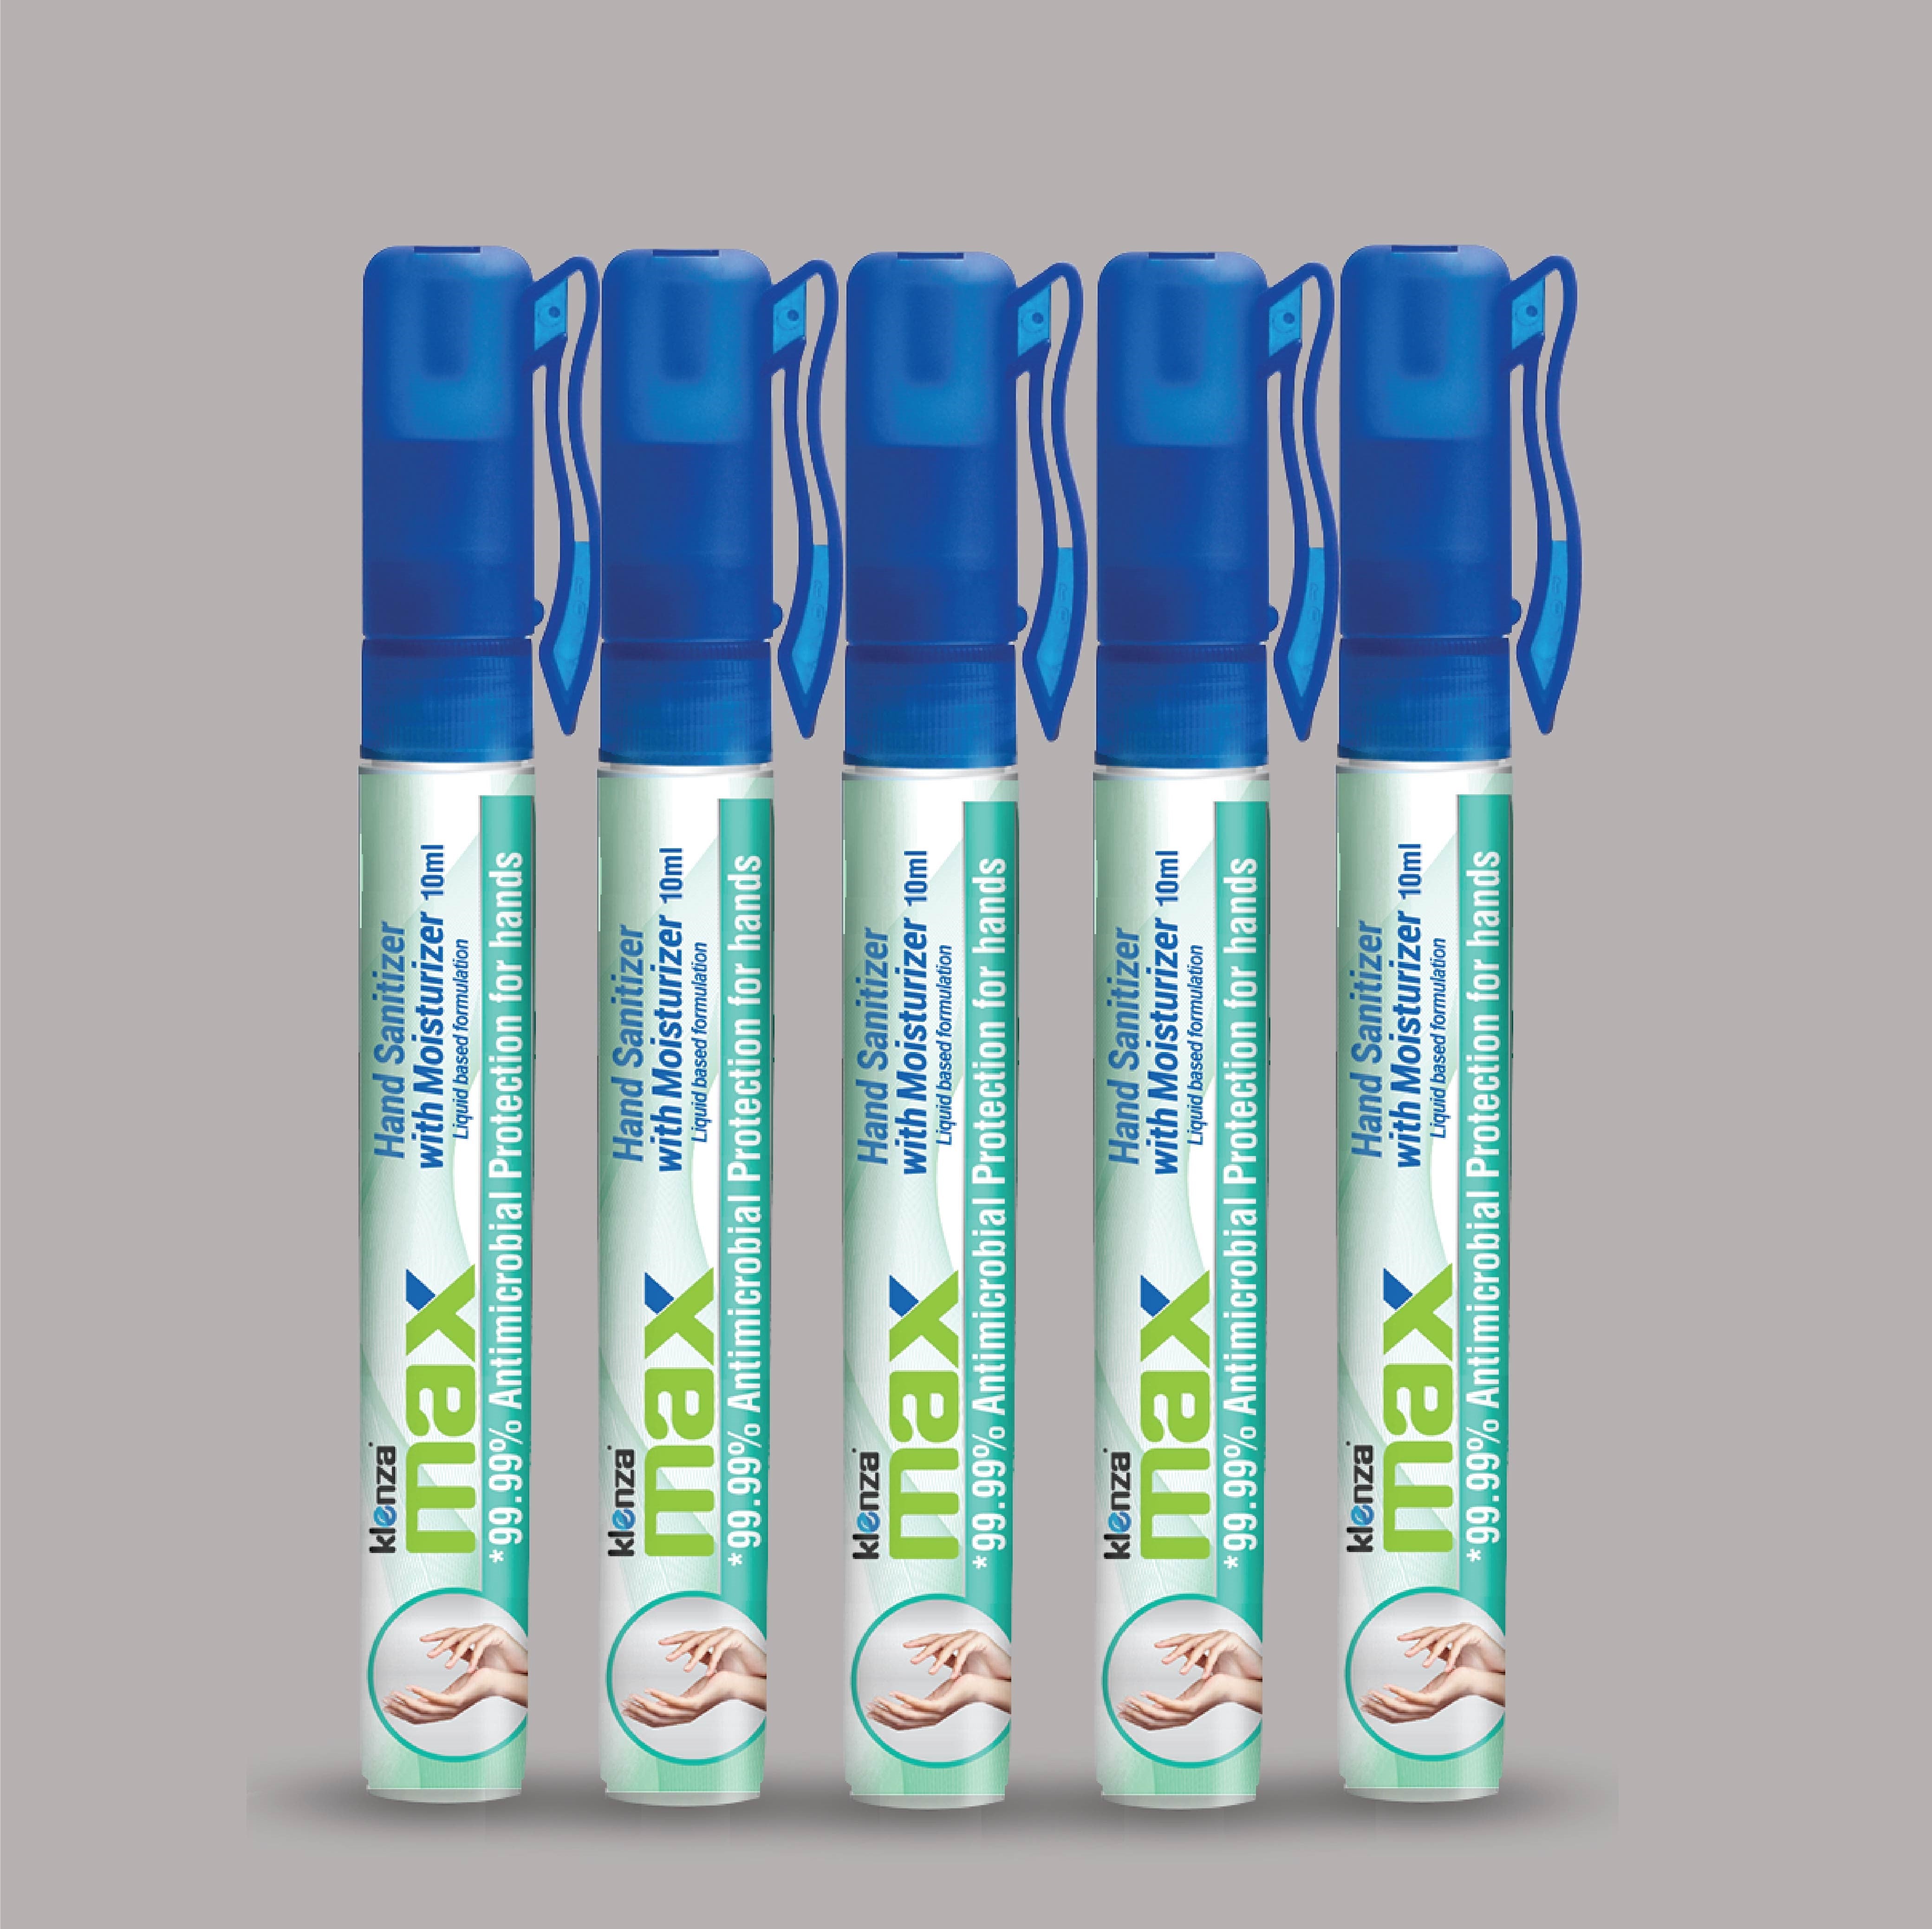 Klenzamax Alcohol Hand Sanitizer Spray Pen 10ml Pack of 5